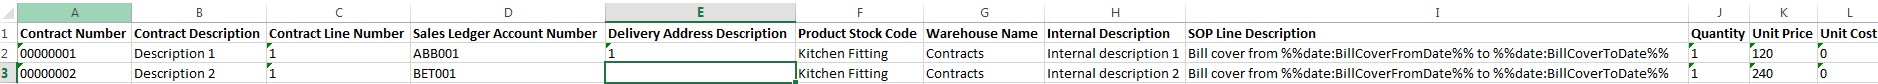 Sicon Contract Manager Help and User Guide contract import screen shot csv example